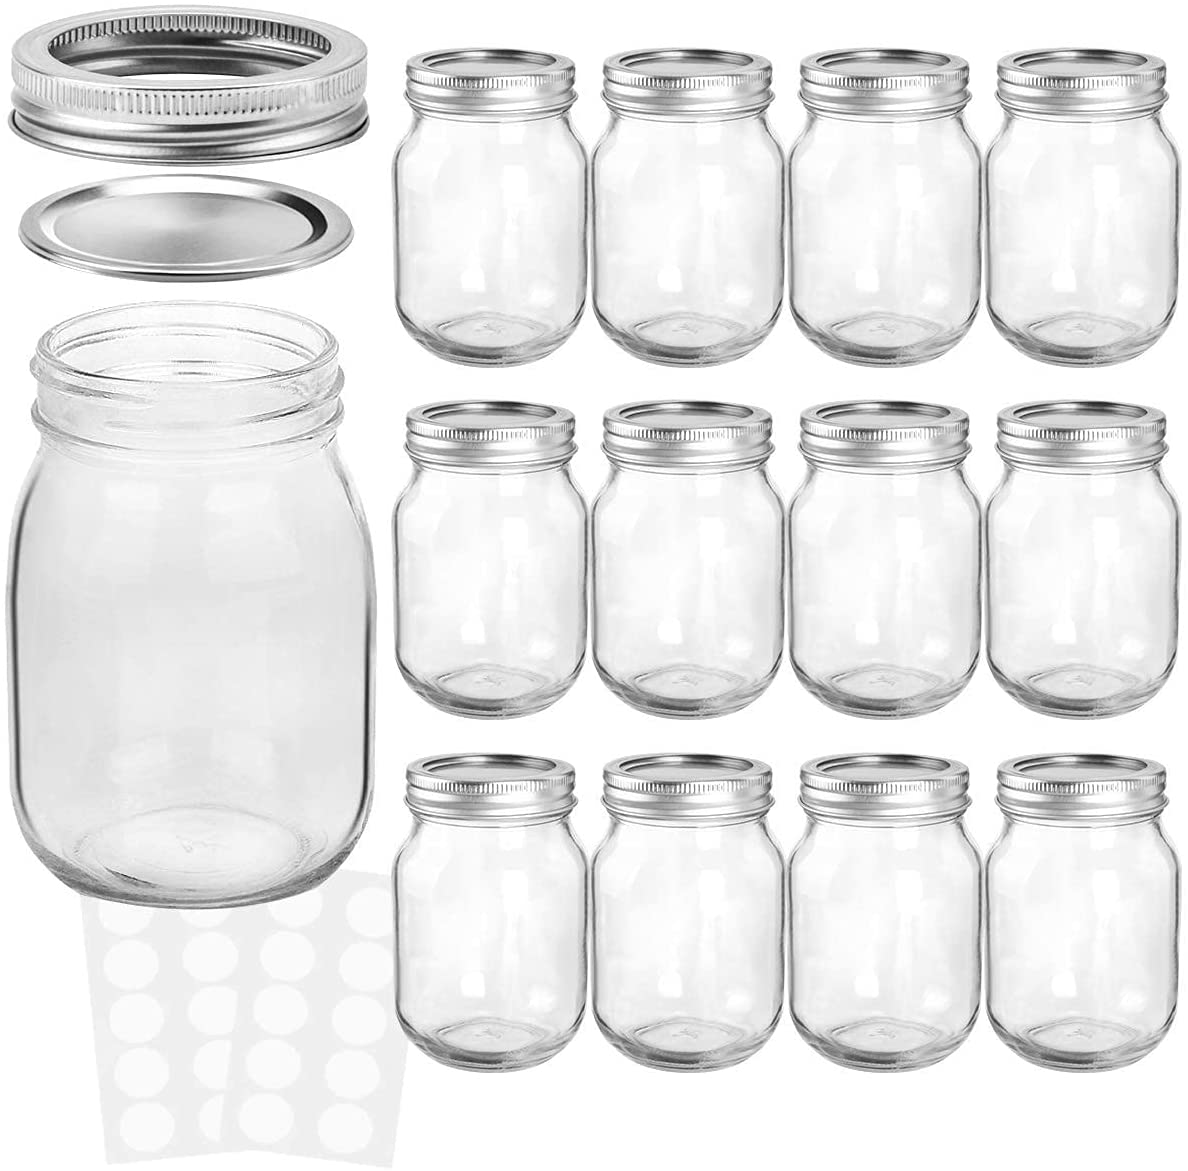 Wide mouth Glass Mason Jars 16 OZ round glass canning jar for Jam Honey Wedding Favors Baby Foods DIY Spice with metal lid